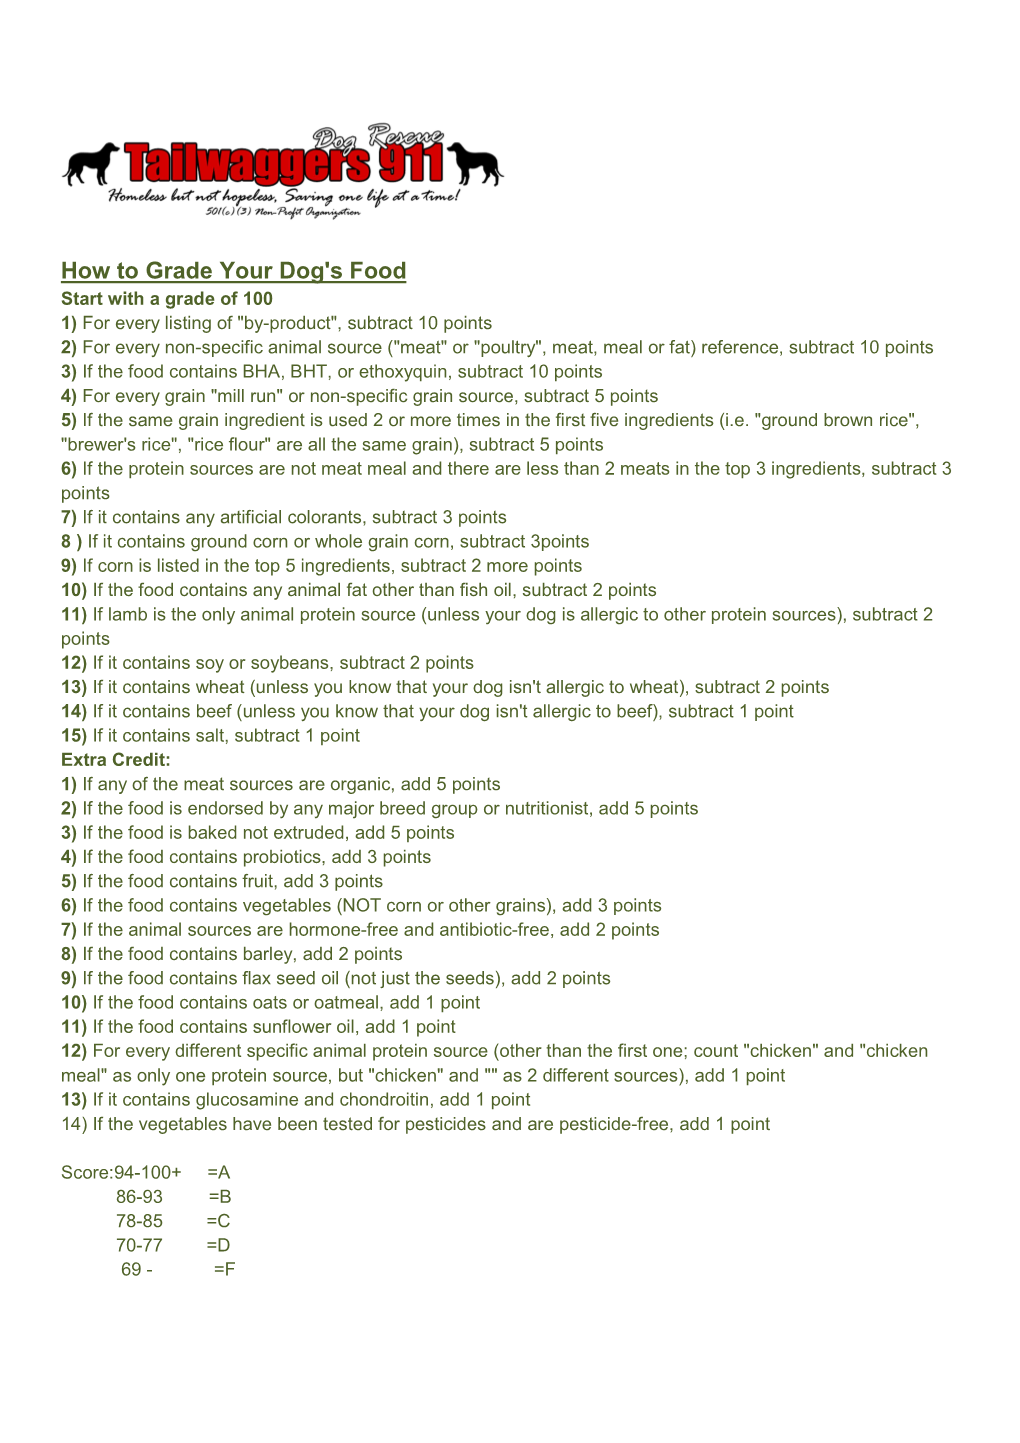 How to Grade Your Dog Food-2